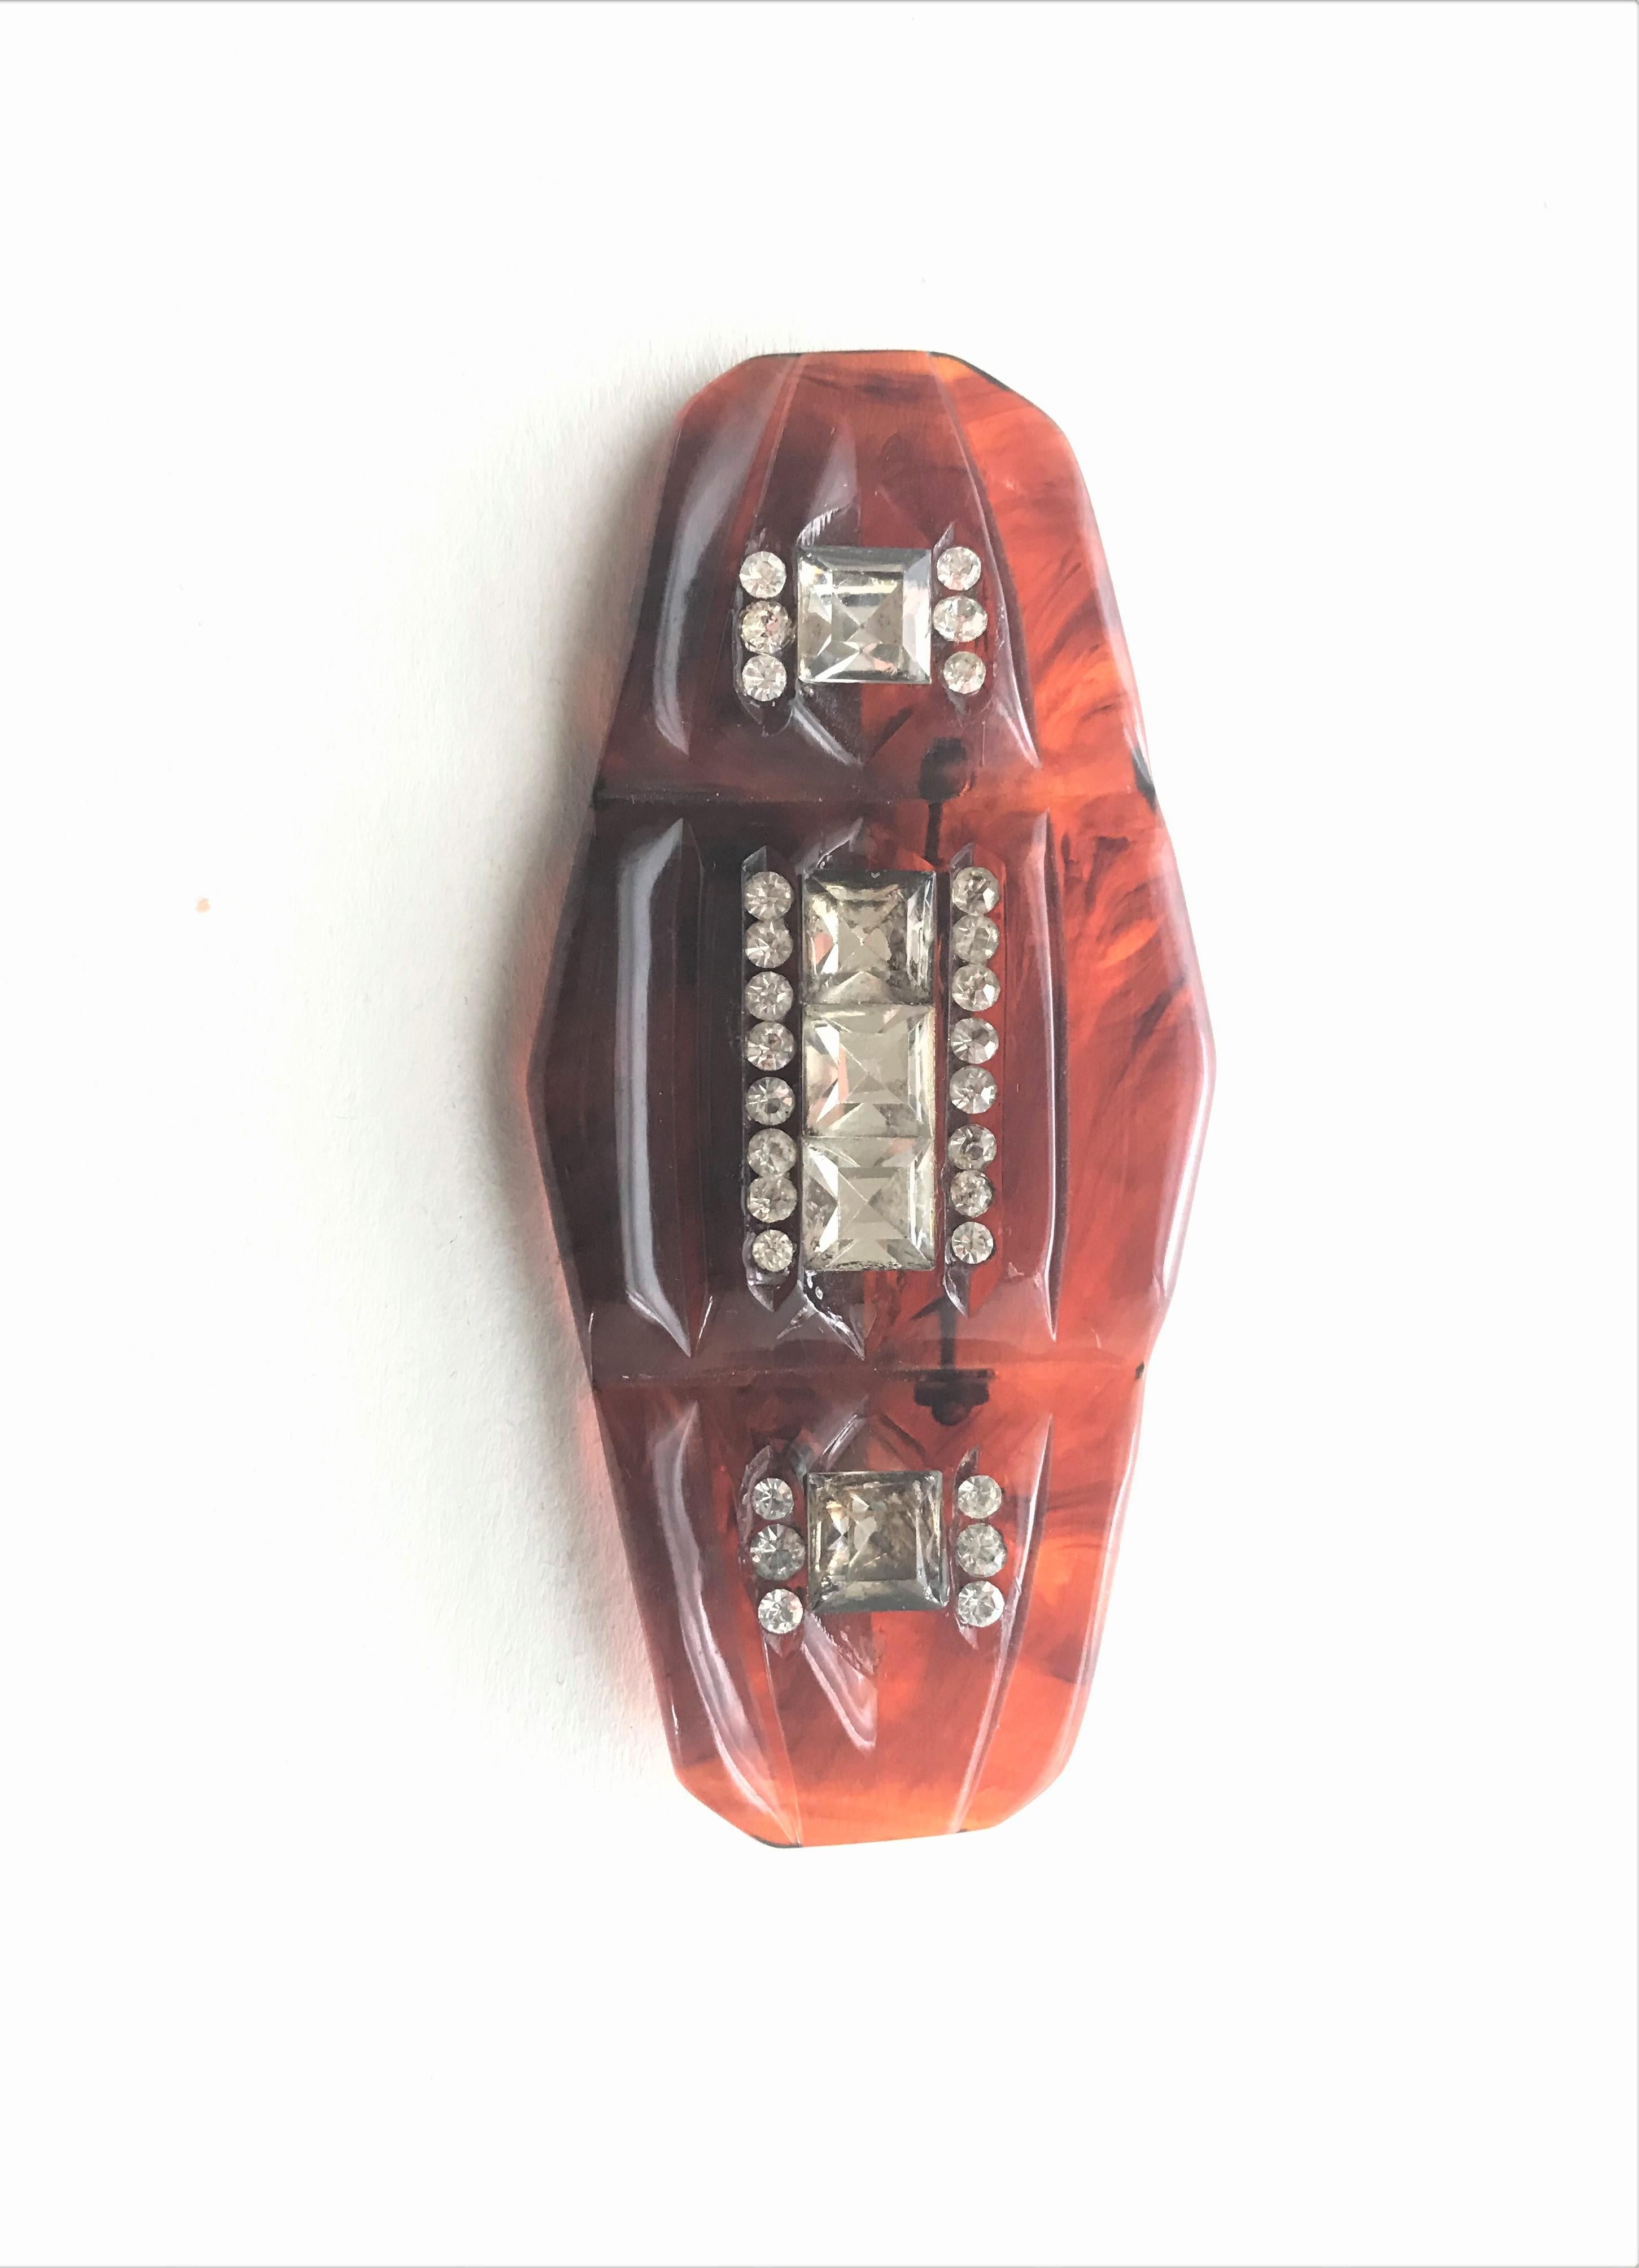 Modern Bakelite brooch with Crystal inlays from 1950s USA For Sale